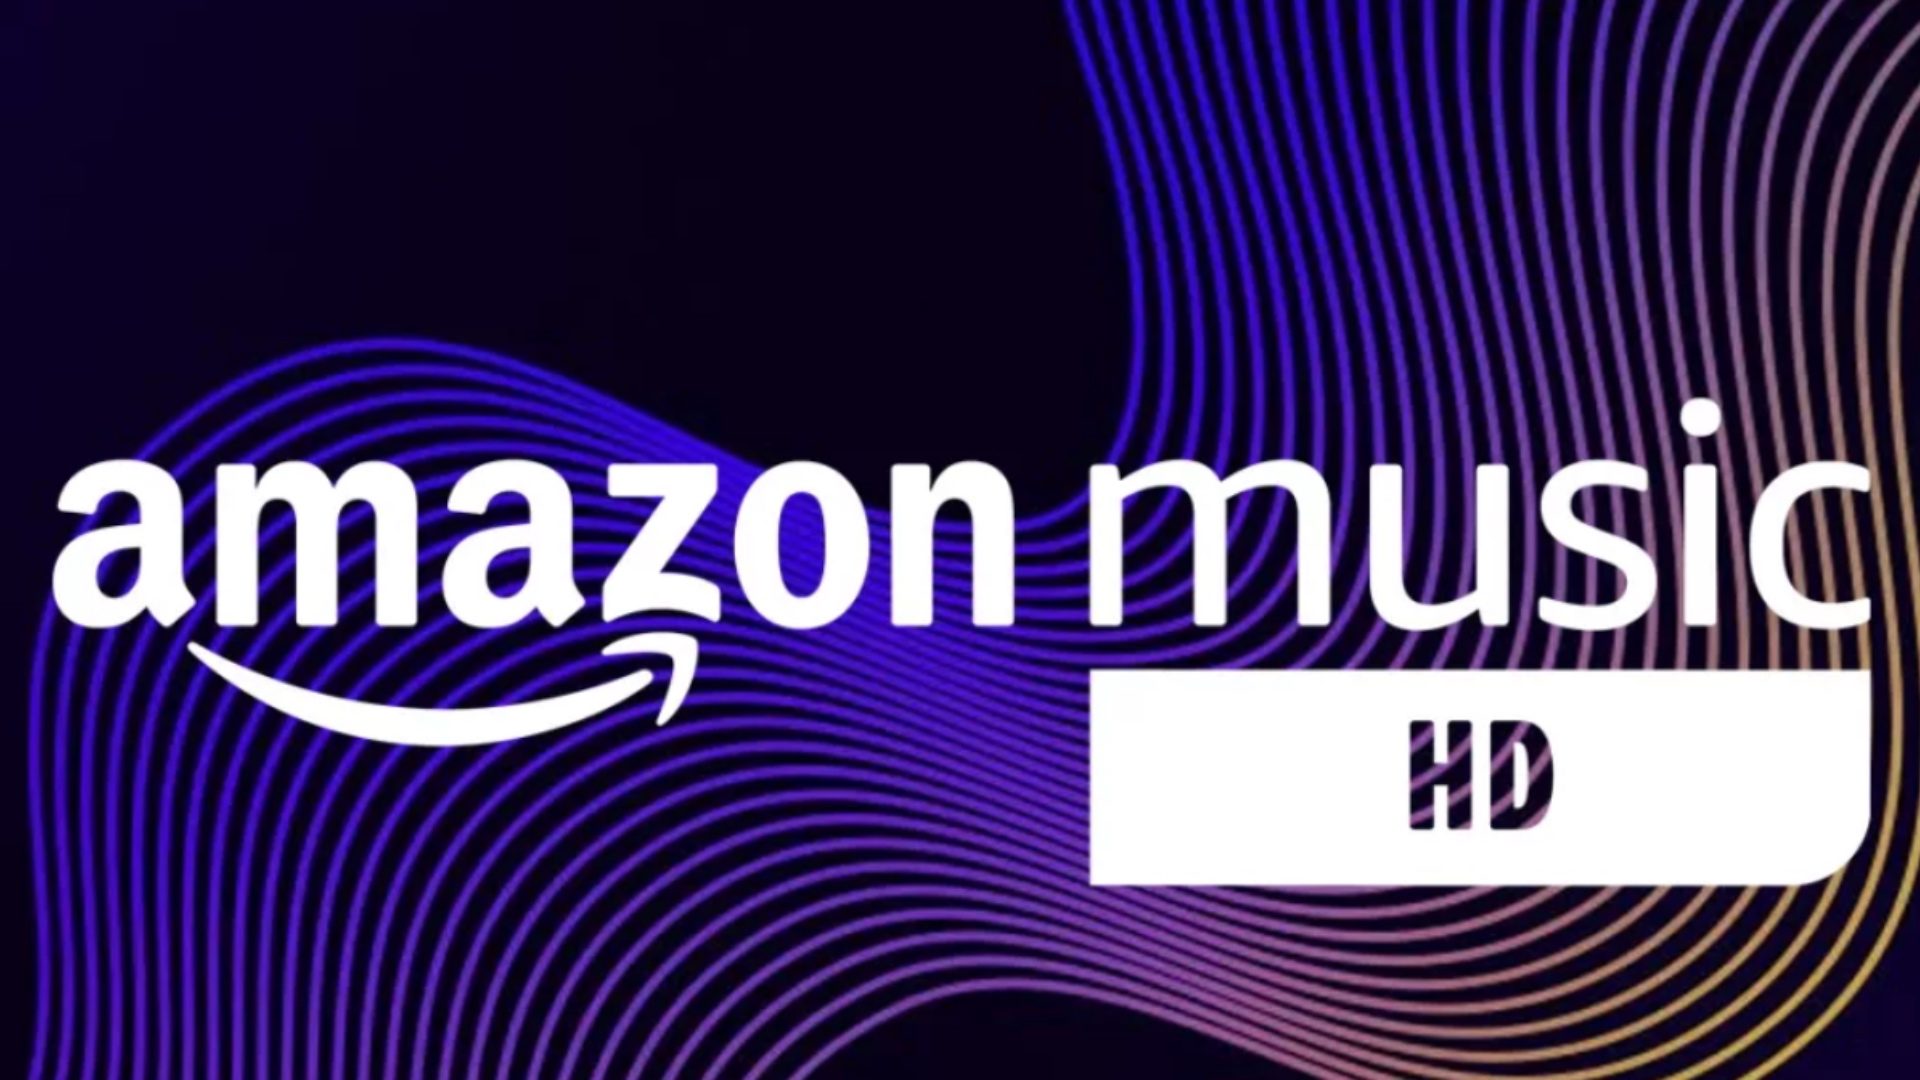 Want Amazon Music HD free for 4 months? Here’s how!